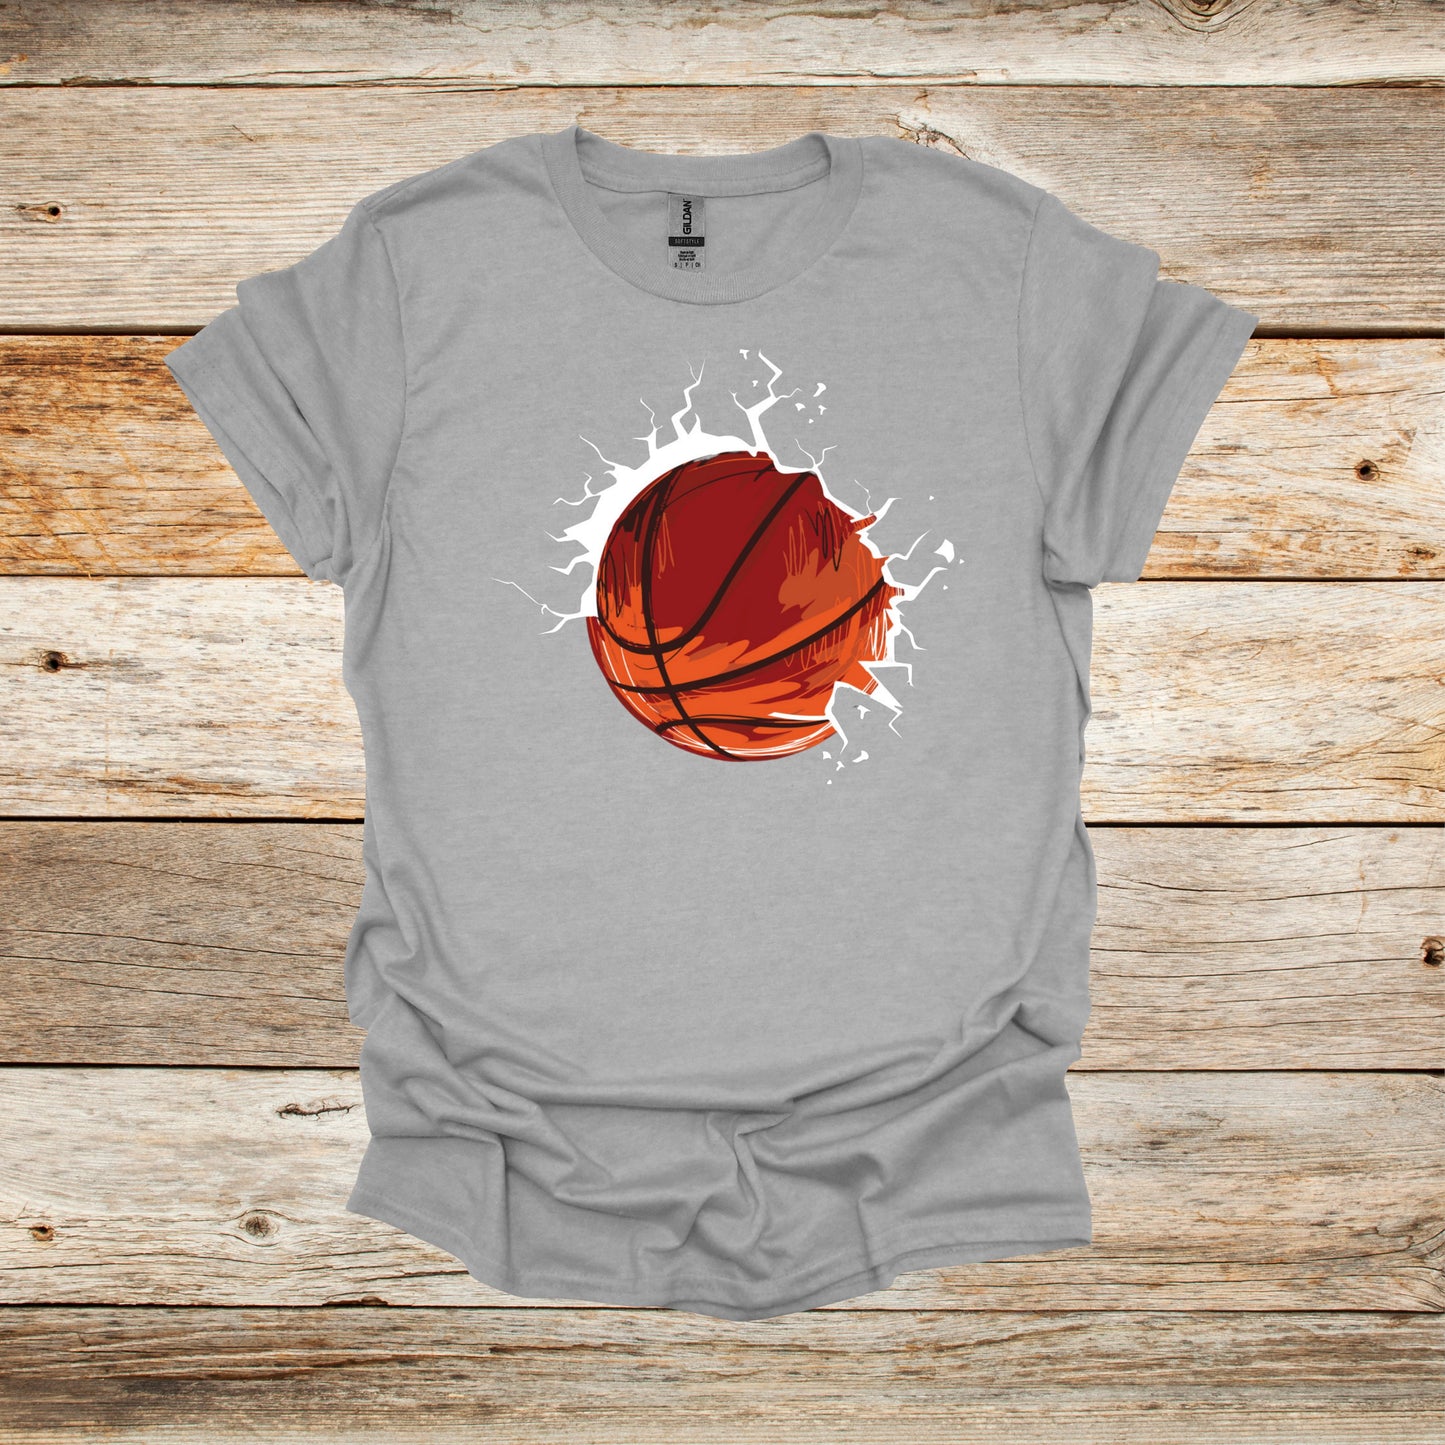 Basketball T-Shirt - Adult and Children's Tee Shirts - Sports T-Shirts Graphic Avenue Sport Grey Adult Small 